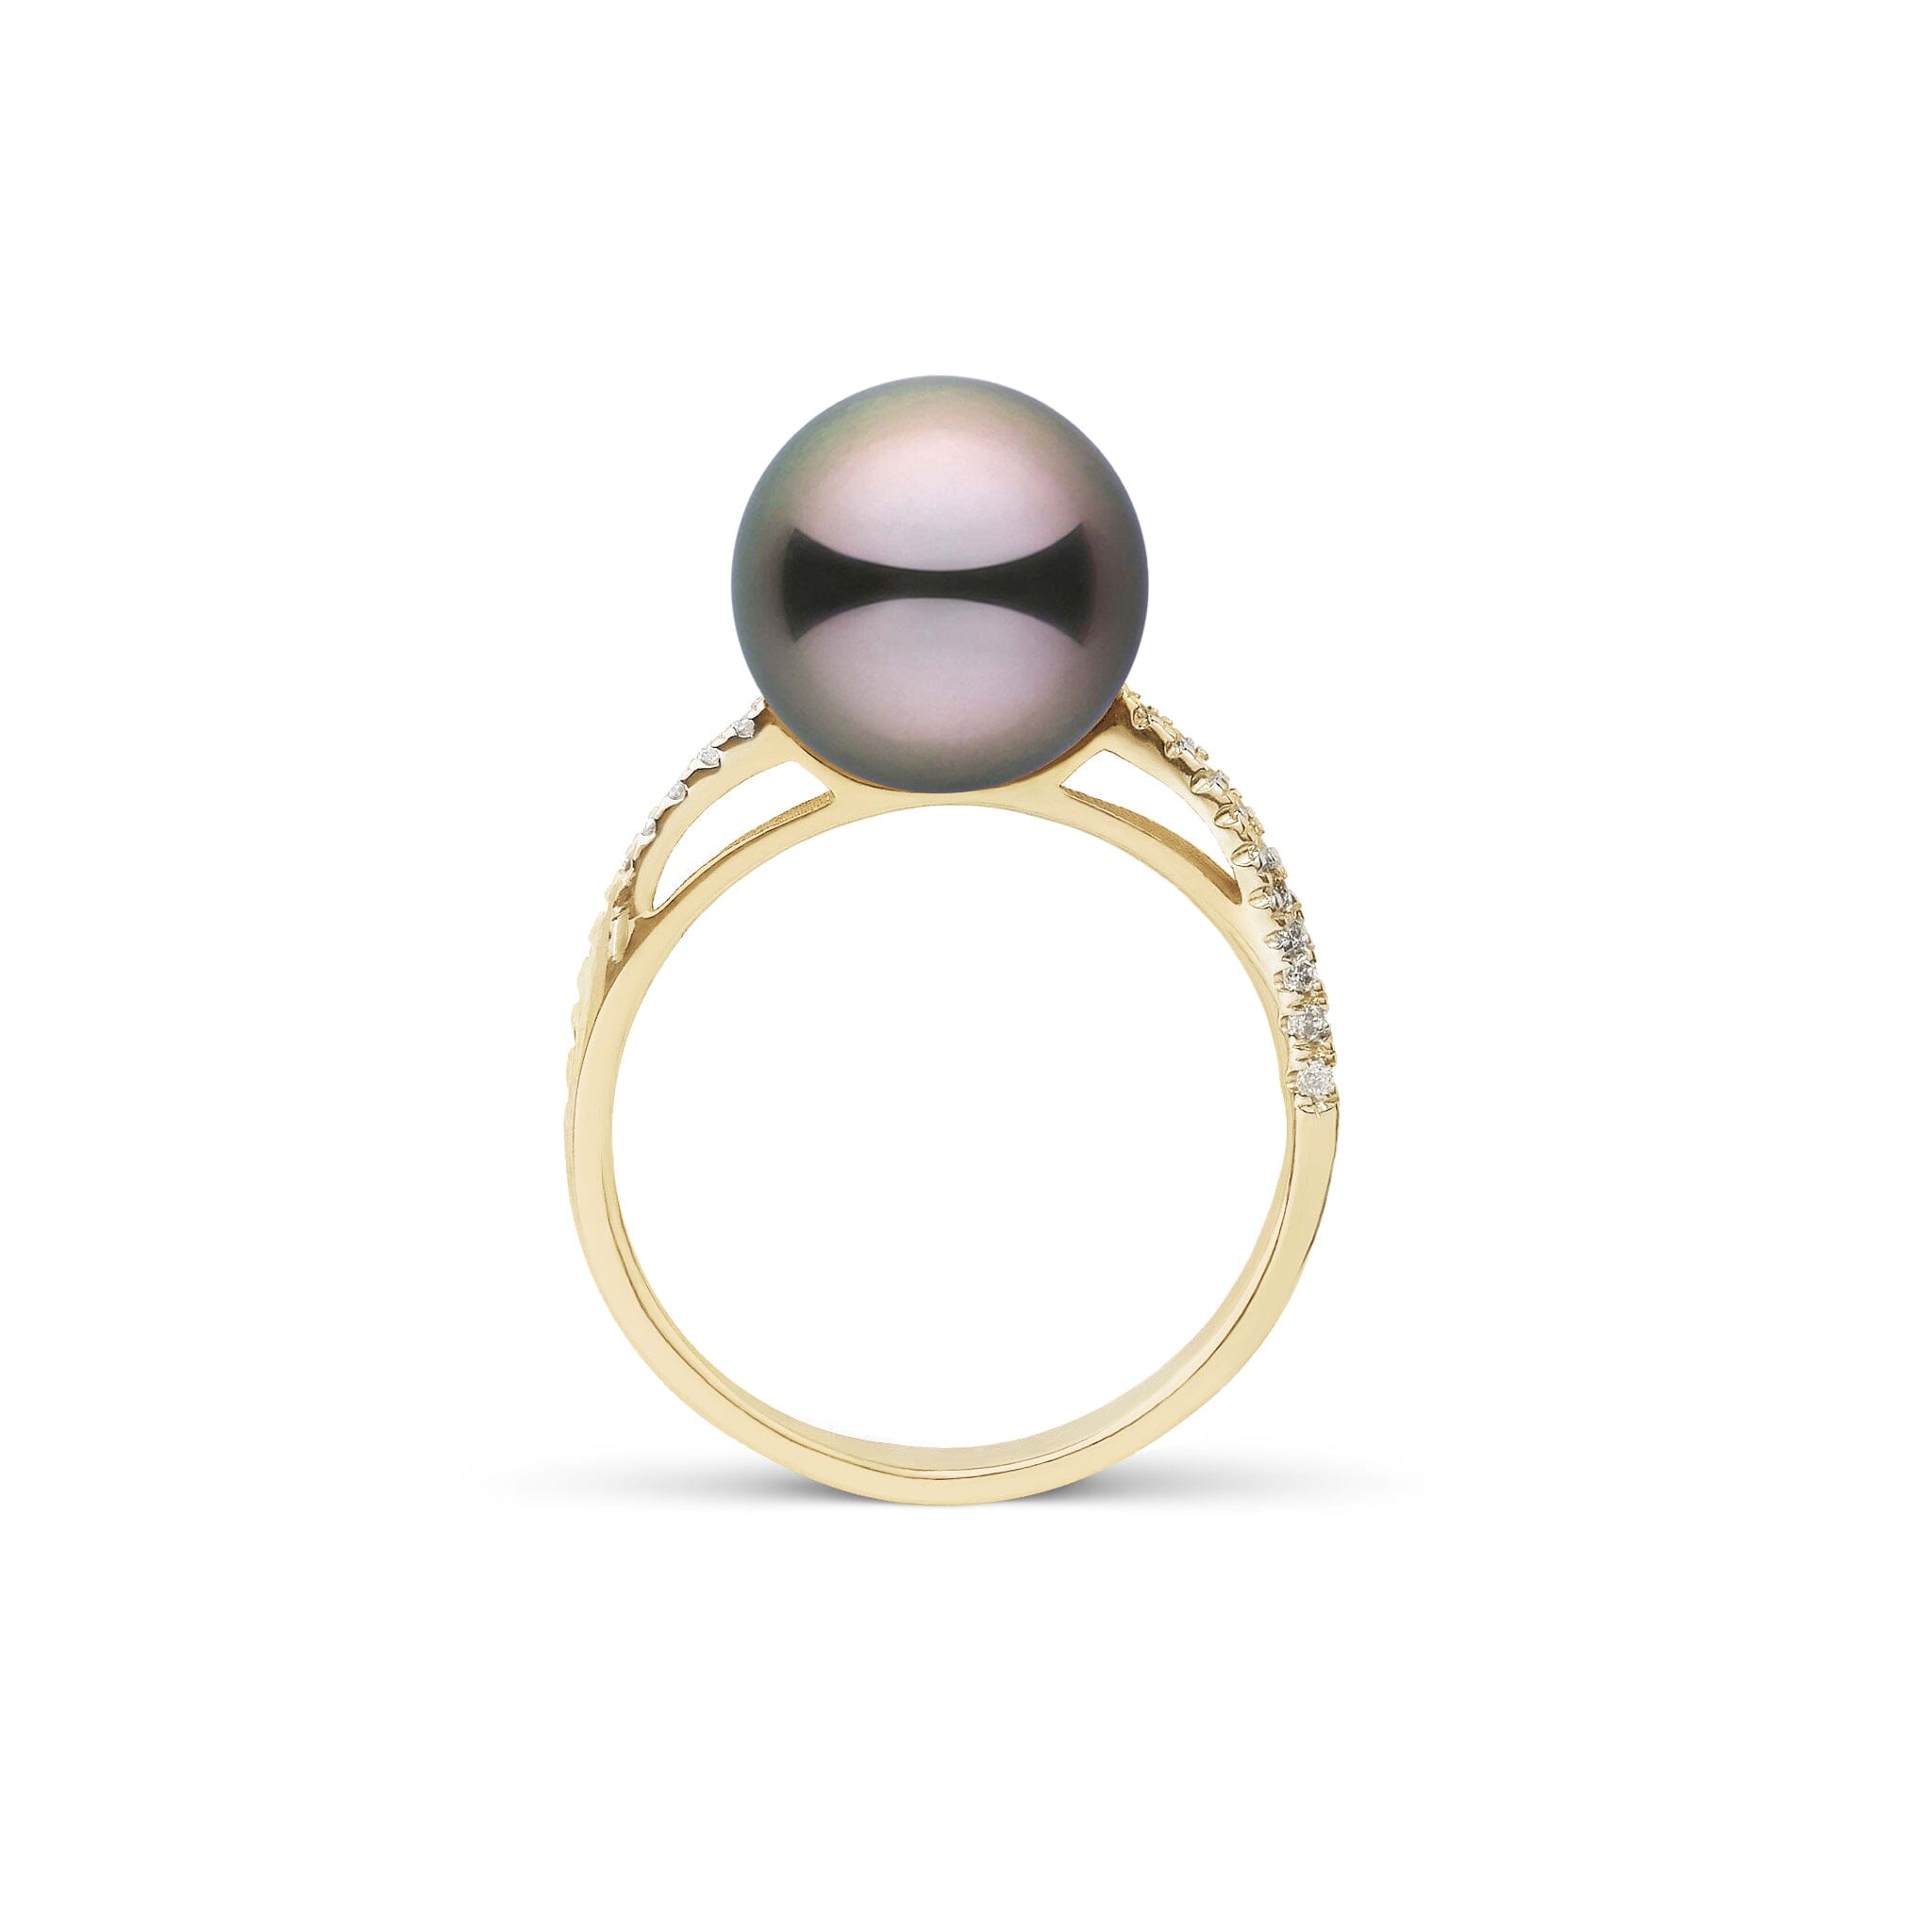 Pirouette Collection 10.0-11.0 mm Tahitian Pearl and Diamond Ring Yellow Gold side